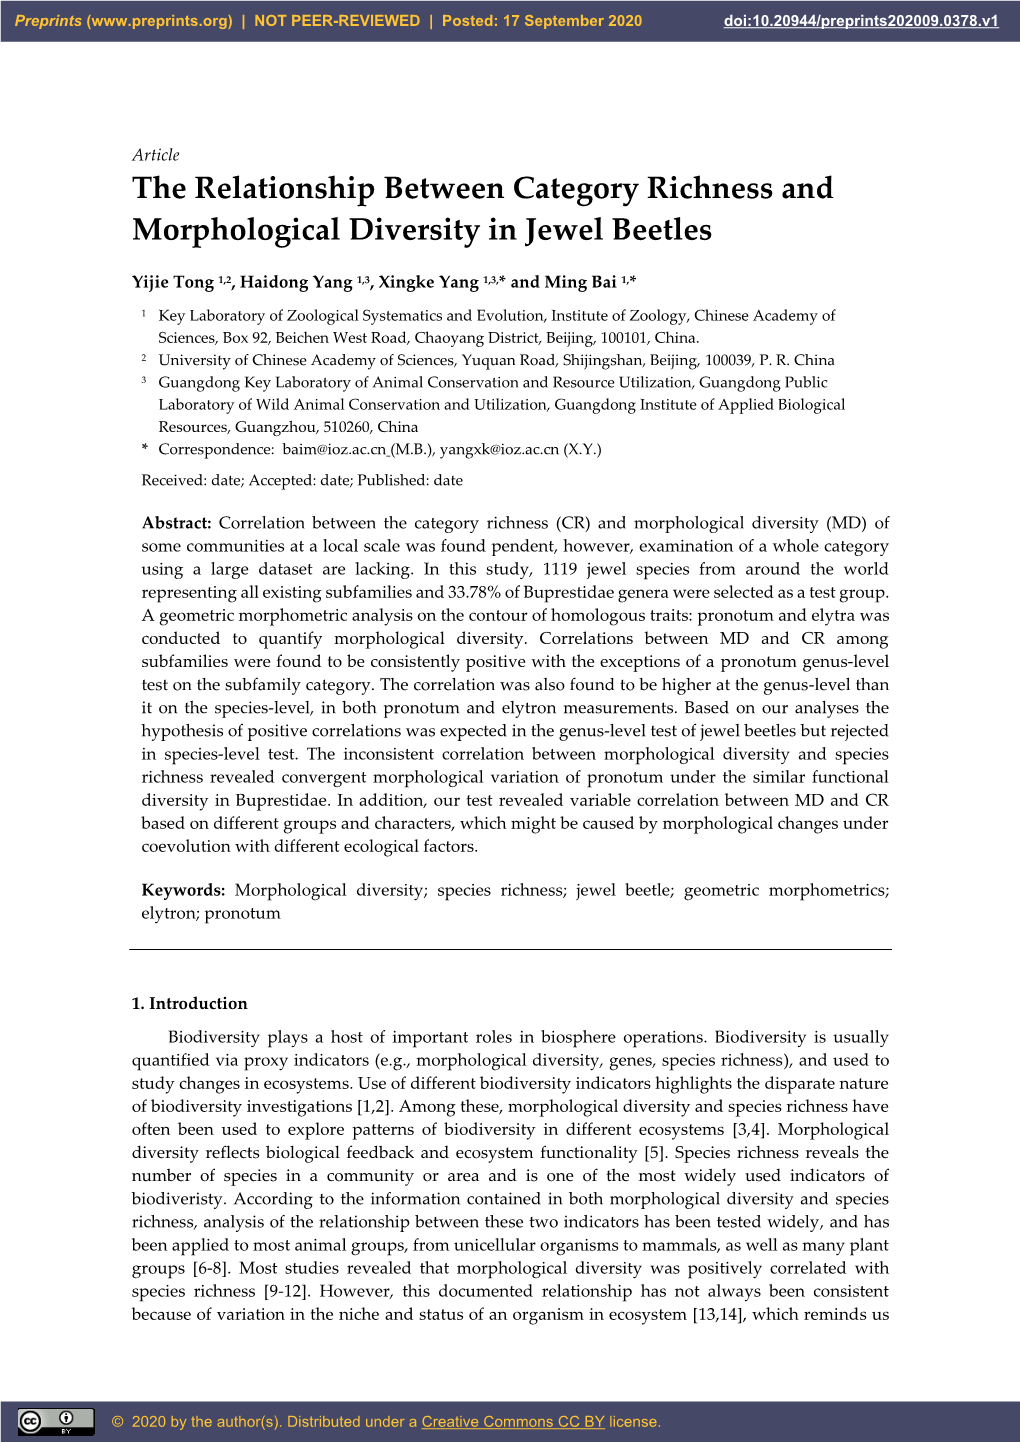 The Relationship Between Category Richness and Morphological Diversity in Jewel Beetles